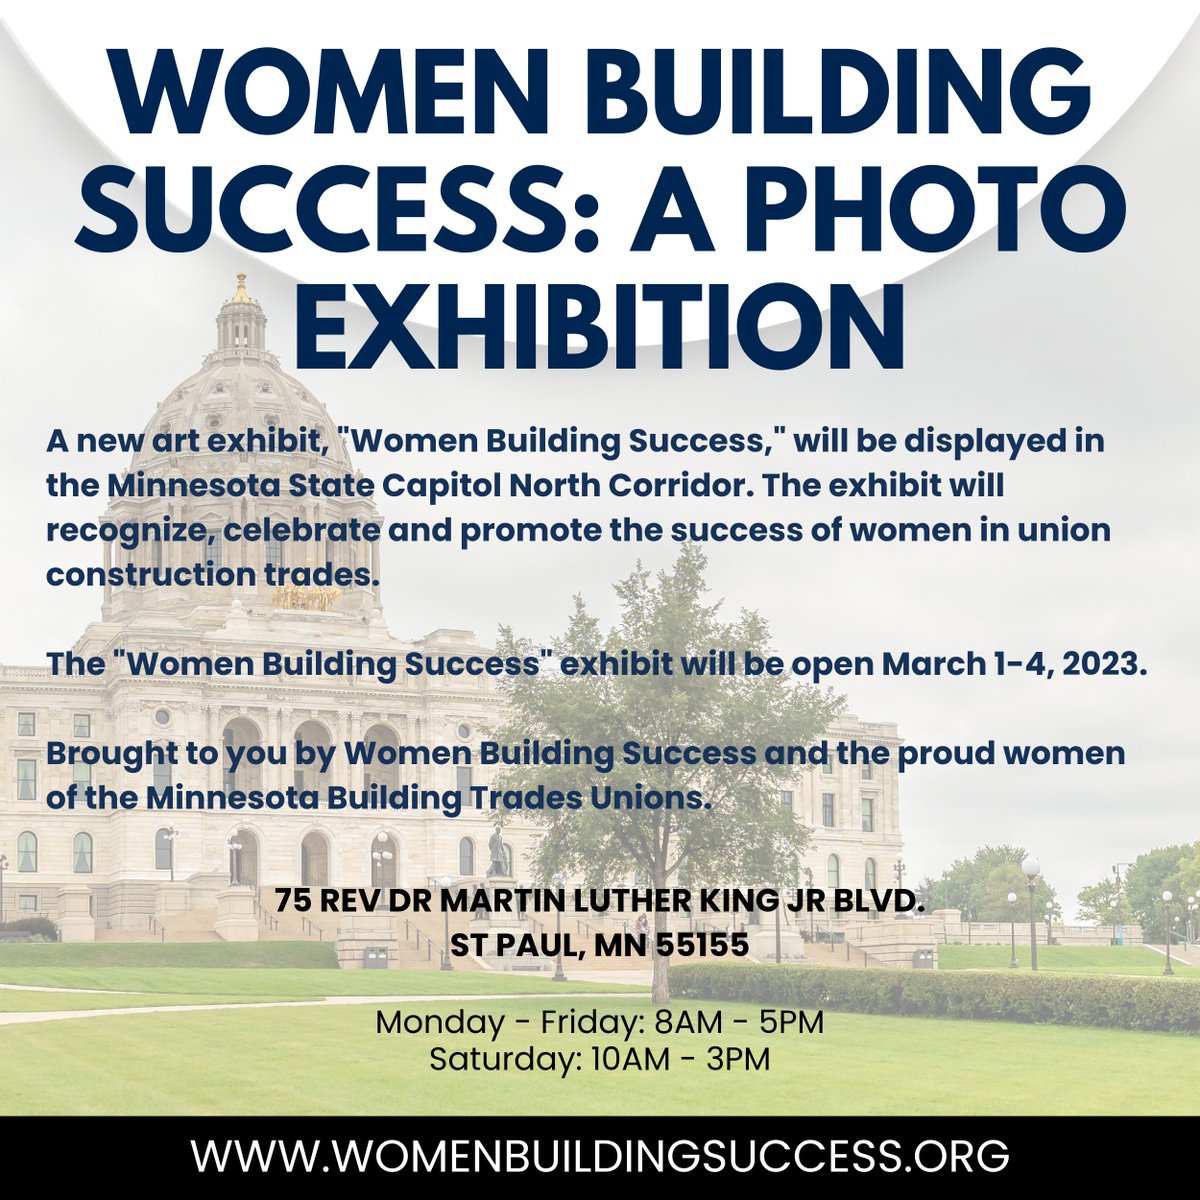 Check this out!

#Photography #BuildingTrades #WomenInConstruction #Unions